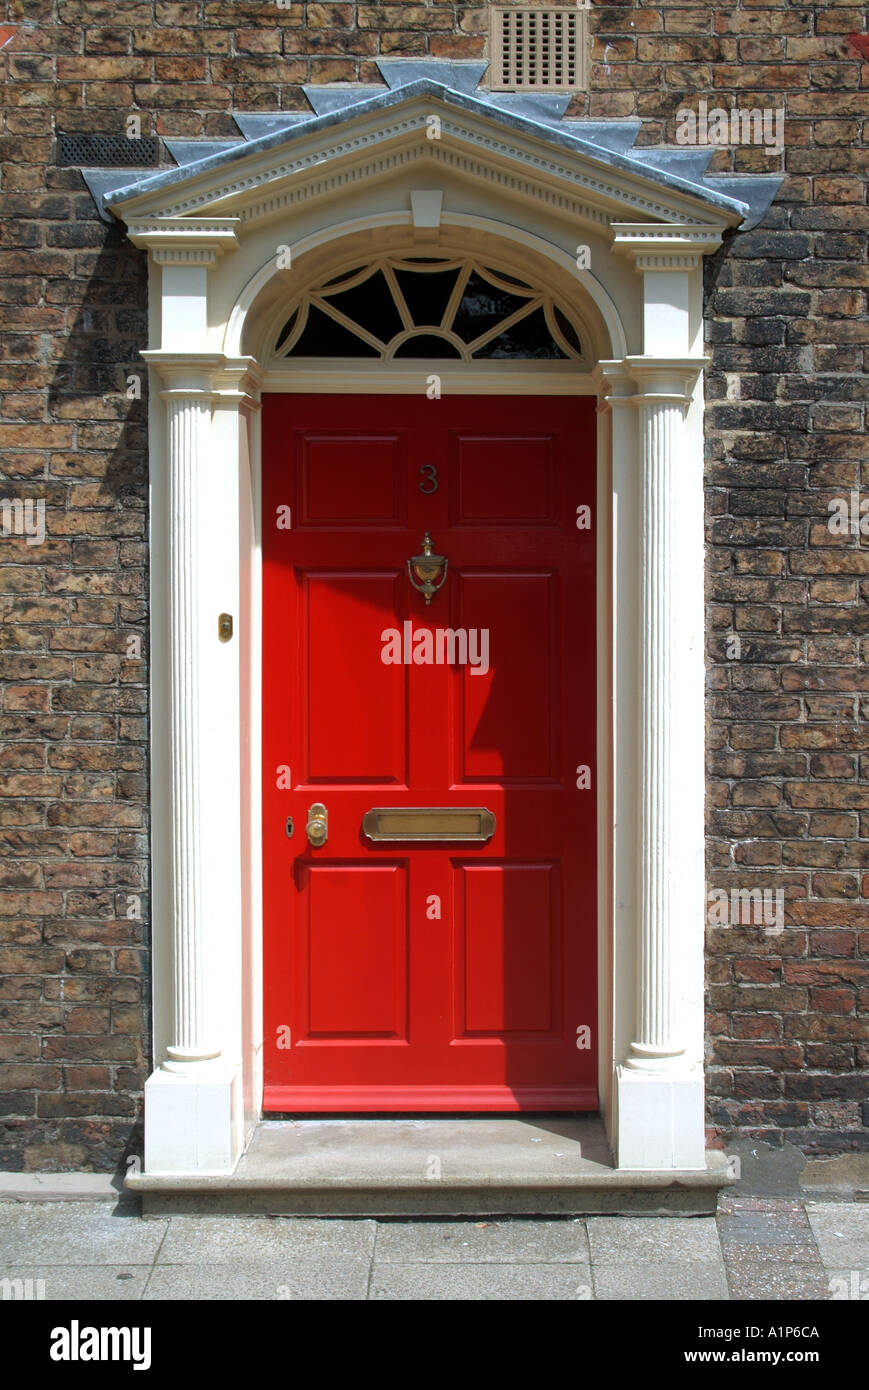 Red residential front door with white surround opening directly onto pavement Stock Photo